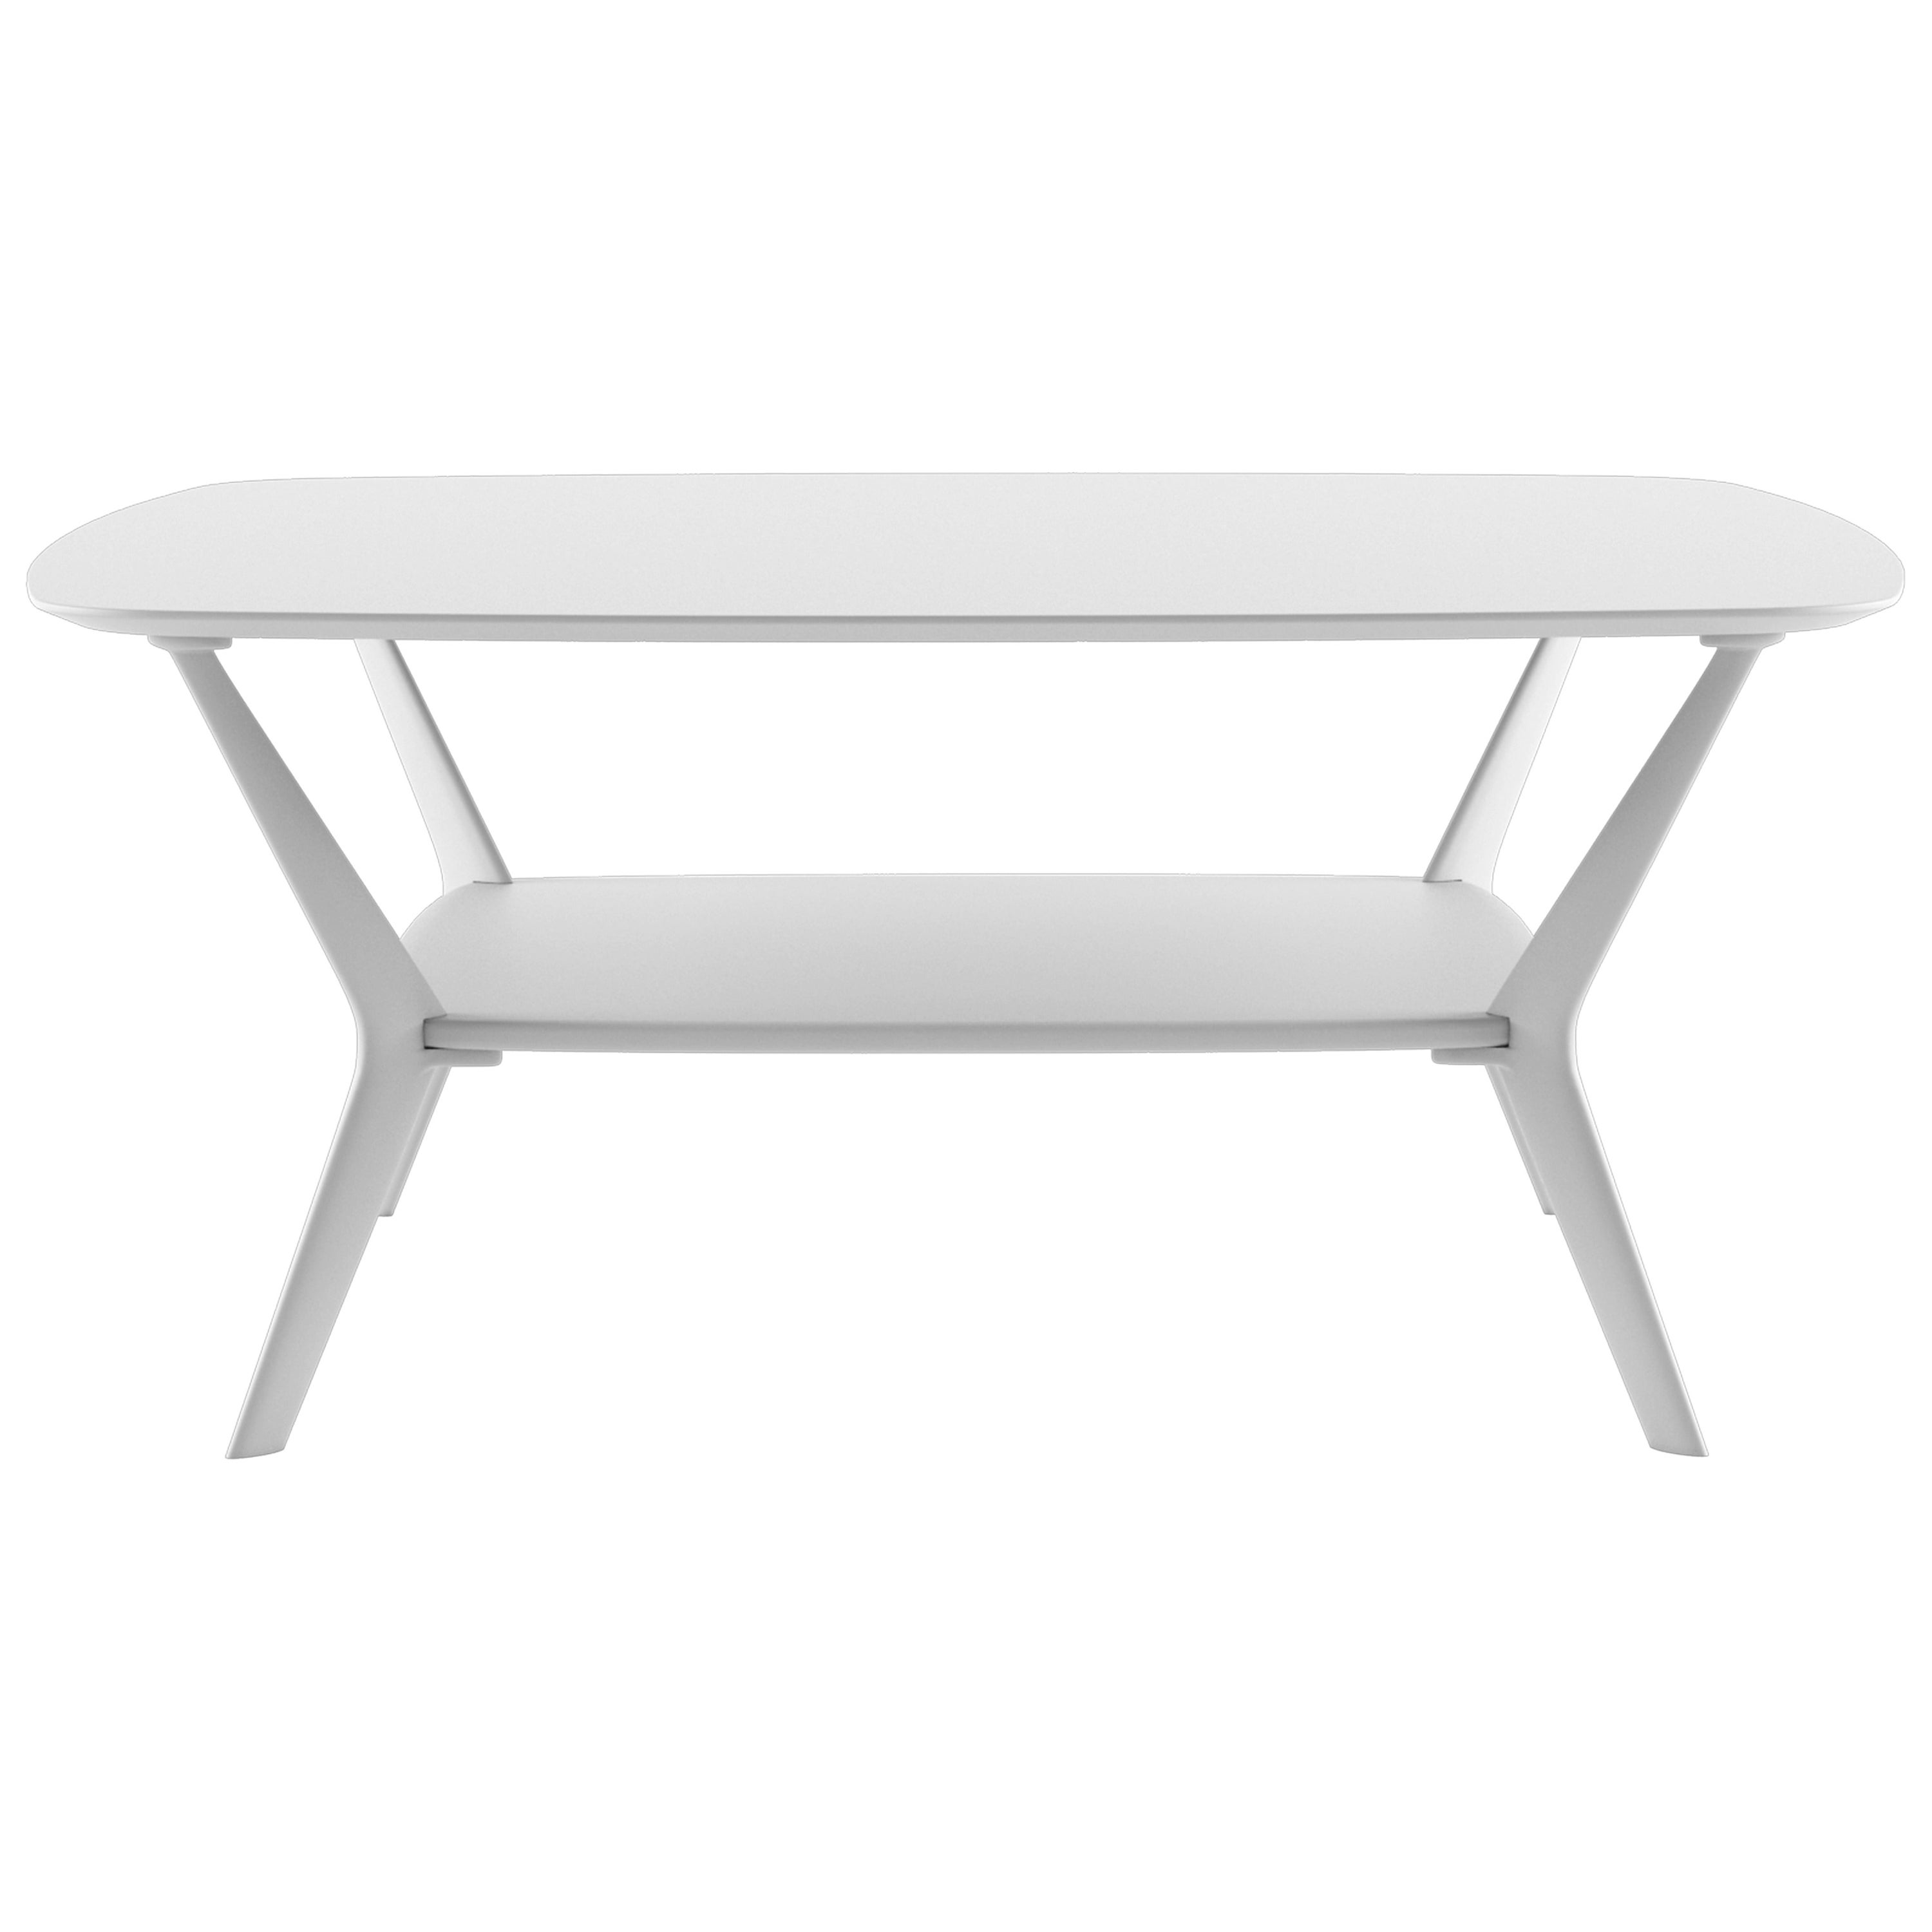 Alias B05 Biplane XS 80X80 Outdoor Table in White Top and Lacquered Frame